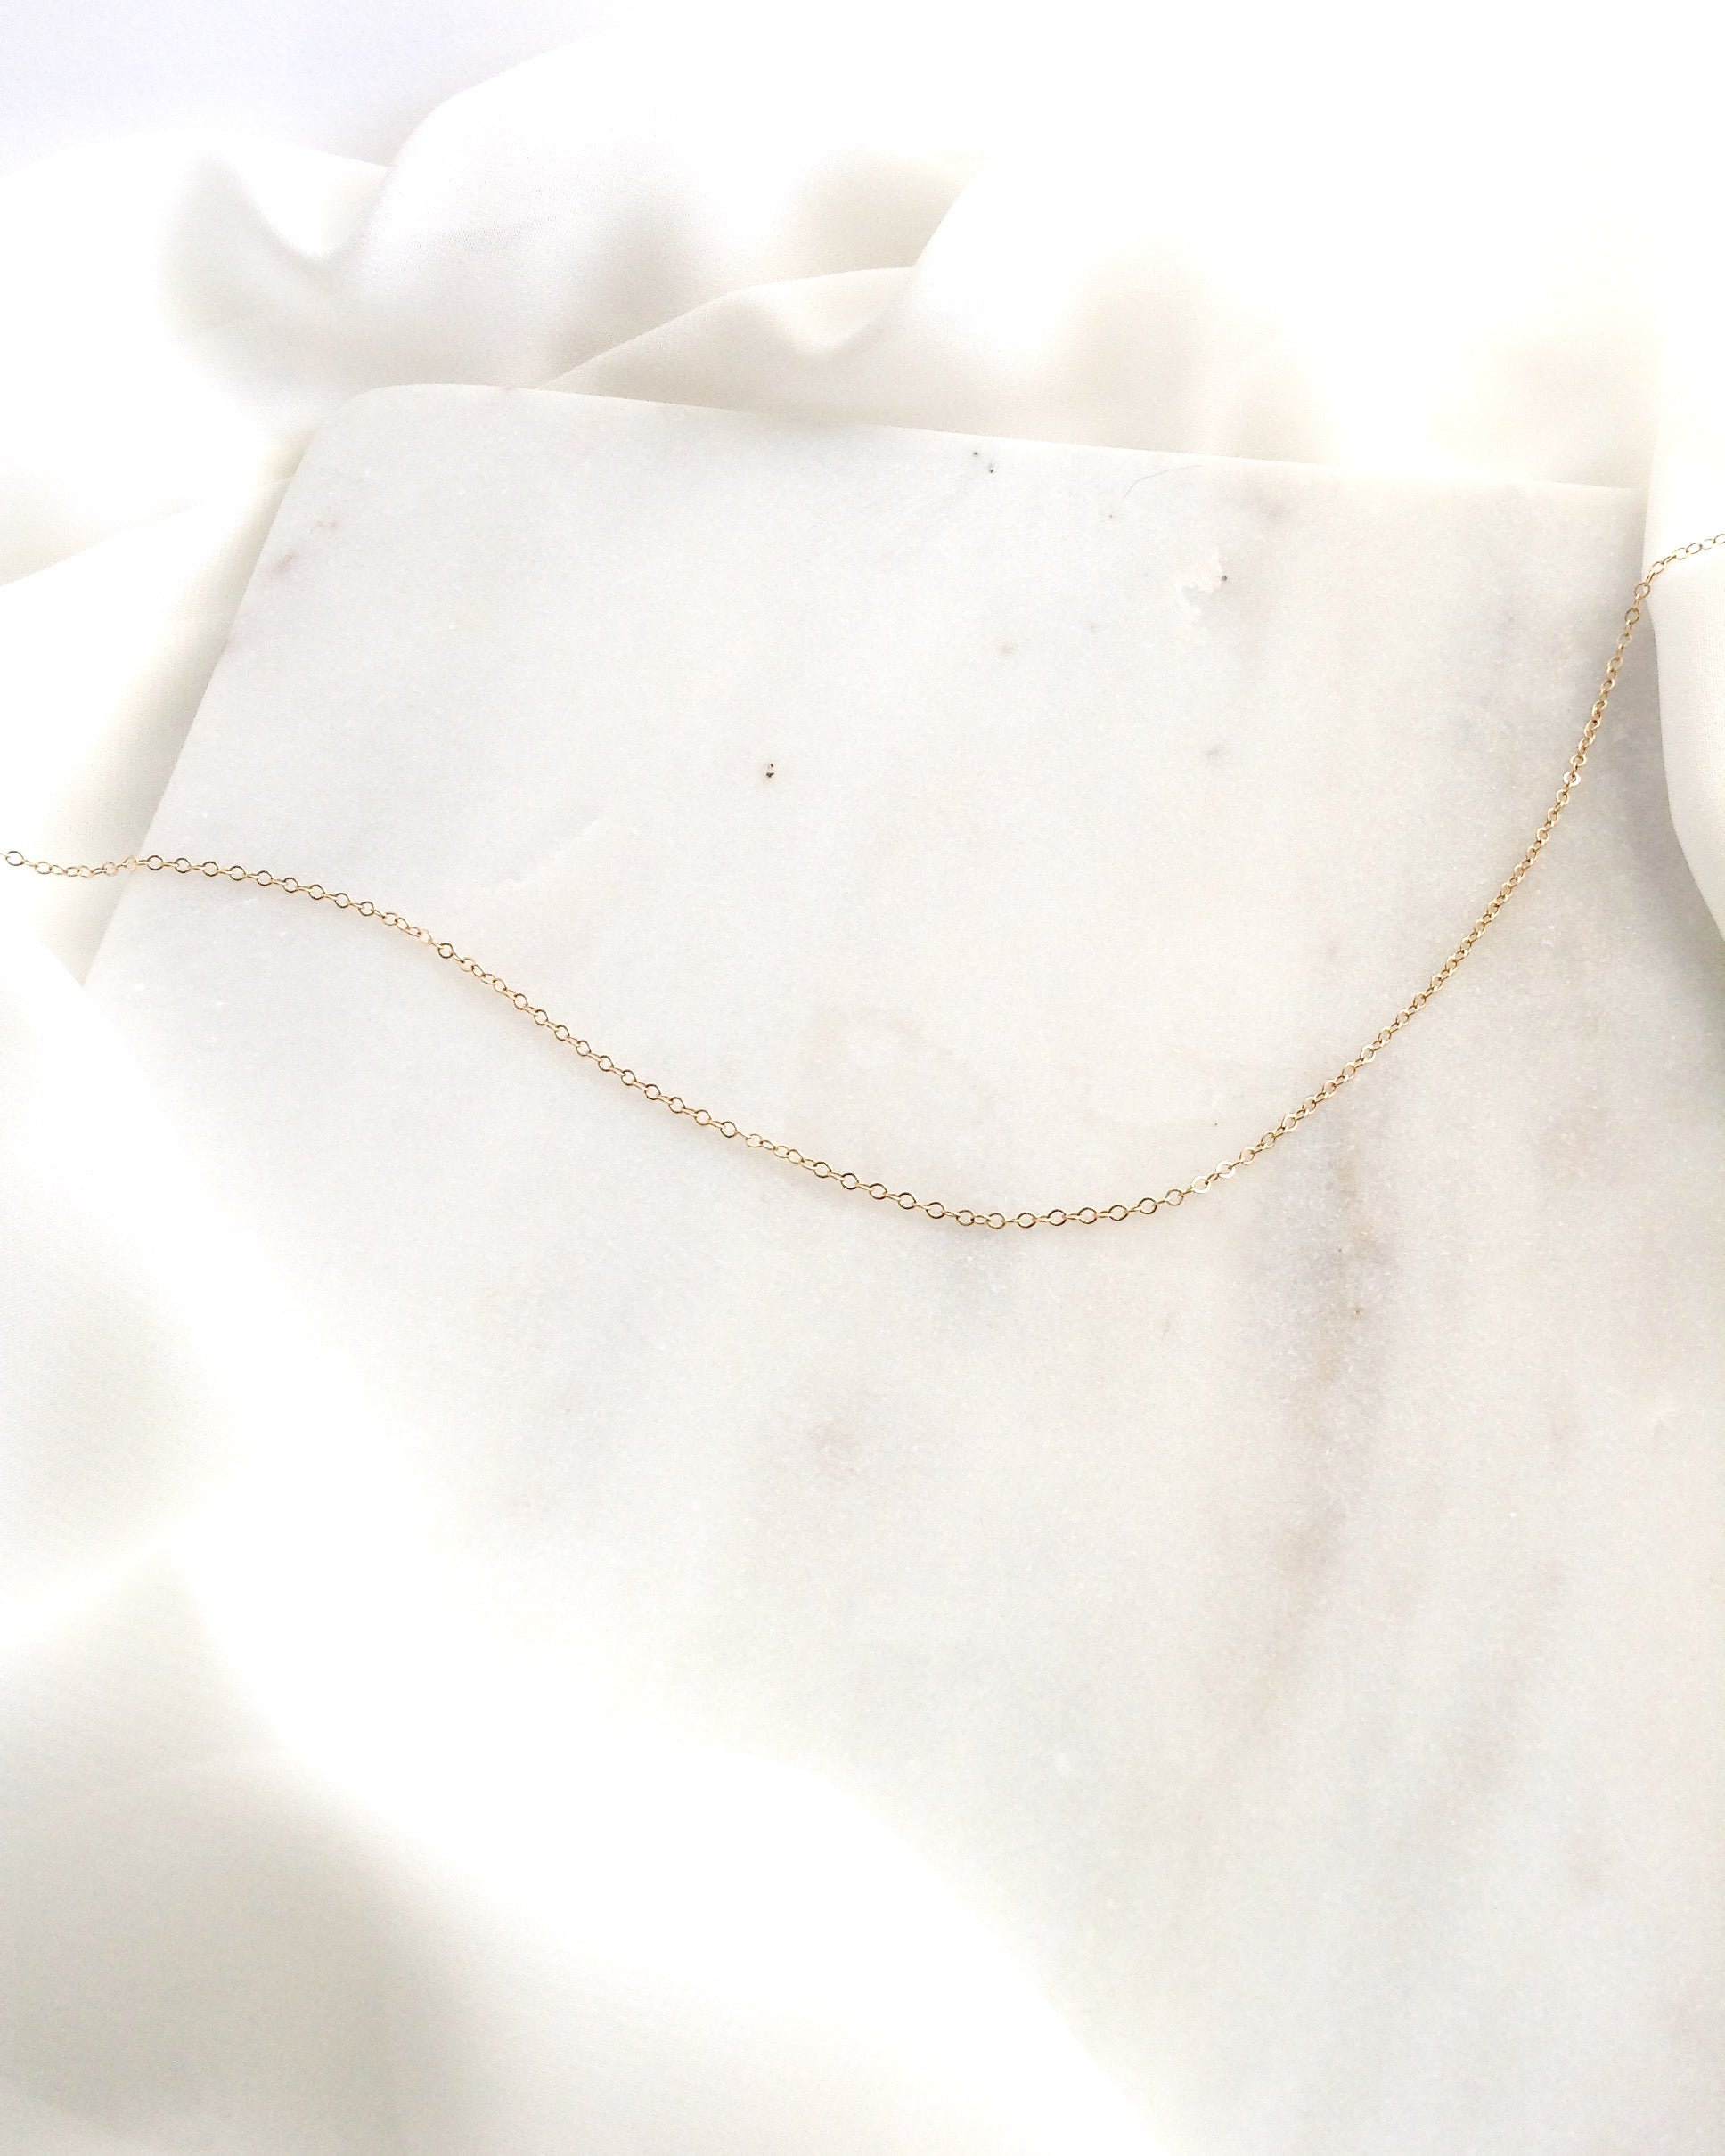 Simple Chain Choker | Thin Chain Choker in Gold Filled or Sterling Silver | IB Jewelry